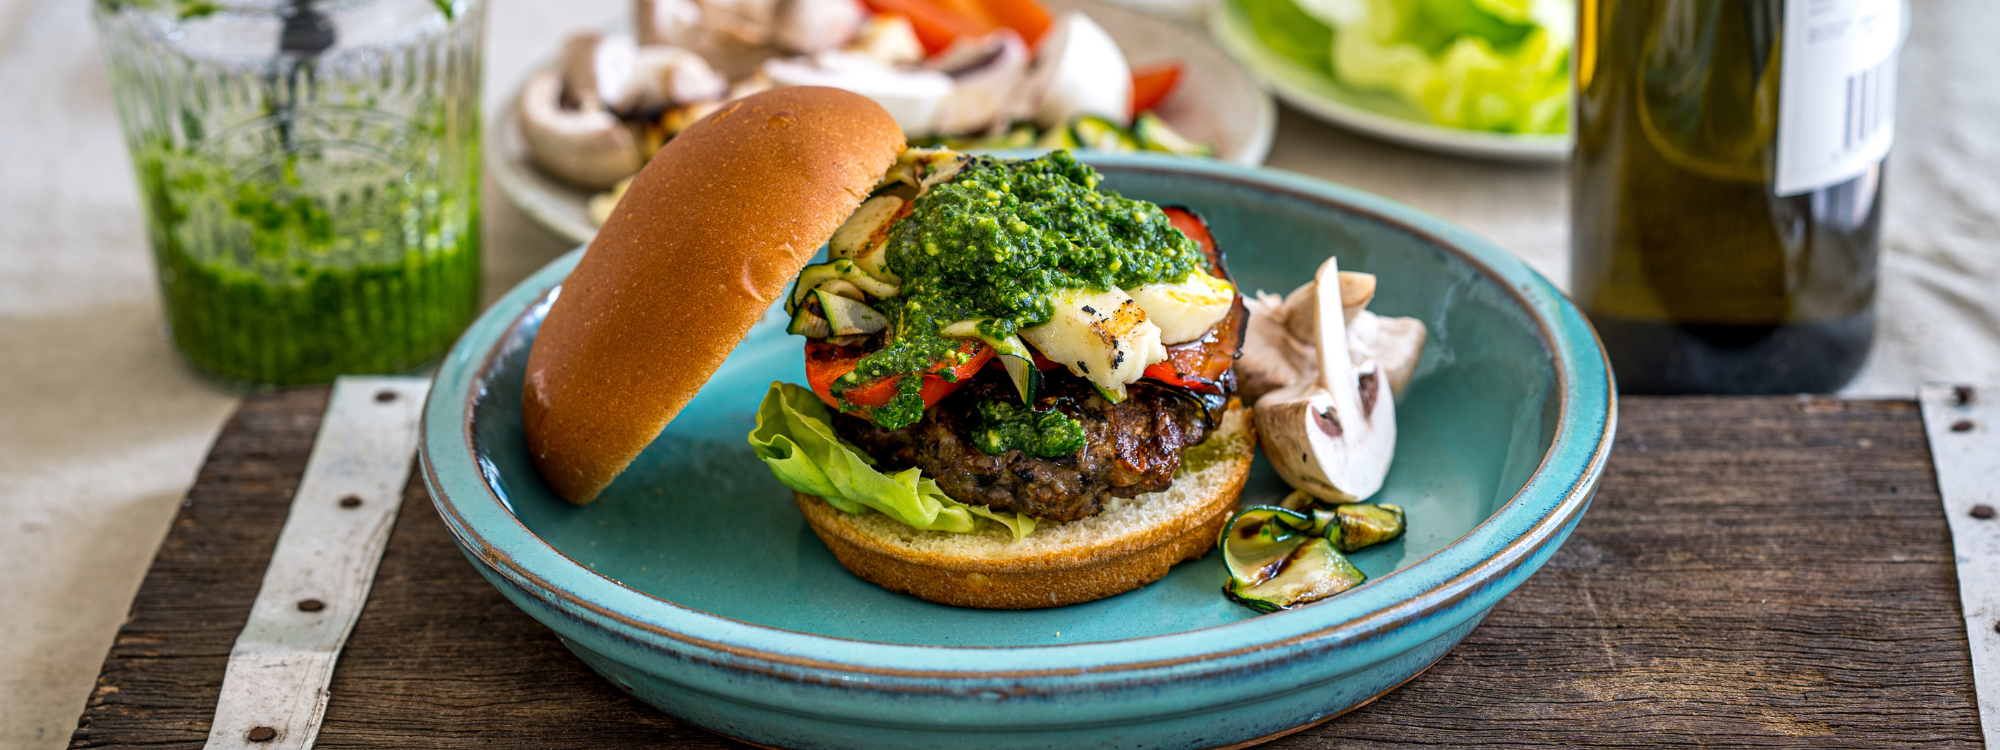 Lamb and Mushroom Blended Halloumi and Grilled Vegetable Burger with Pesto Mayo_summeredition72